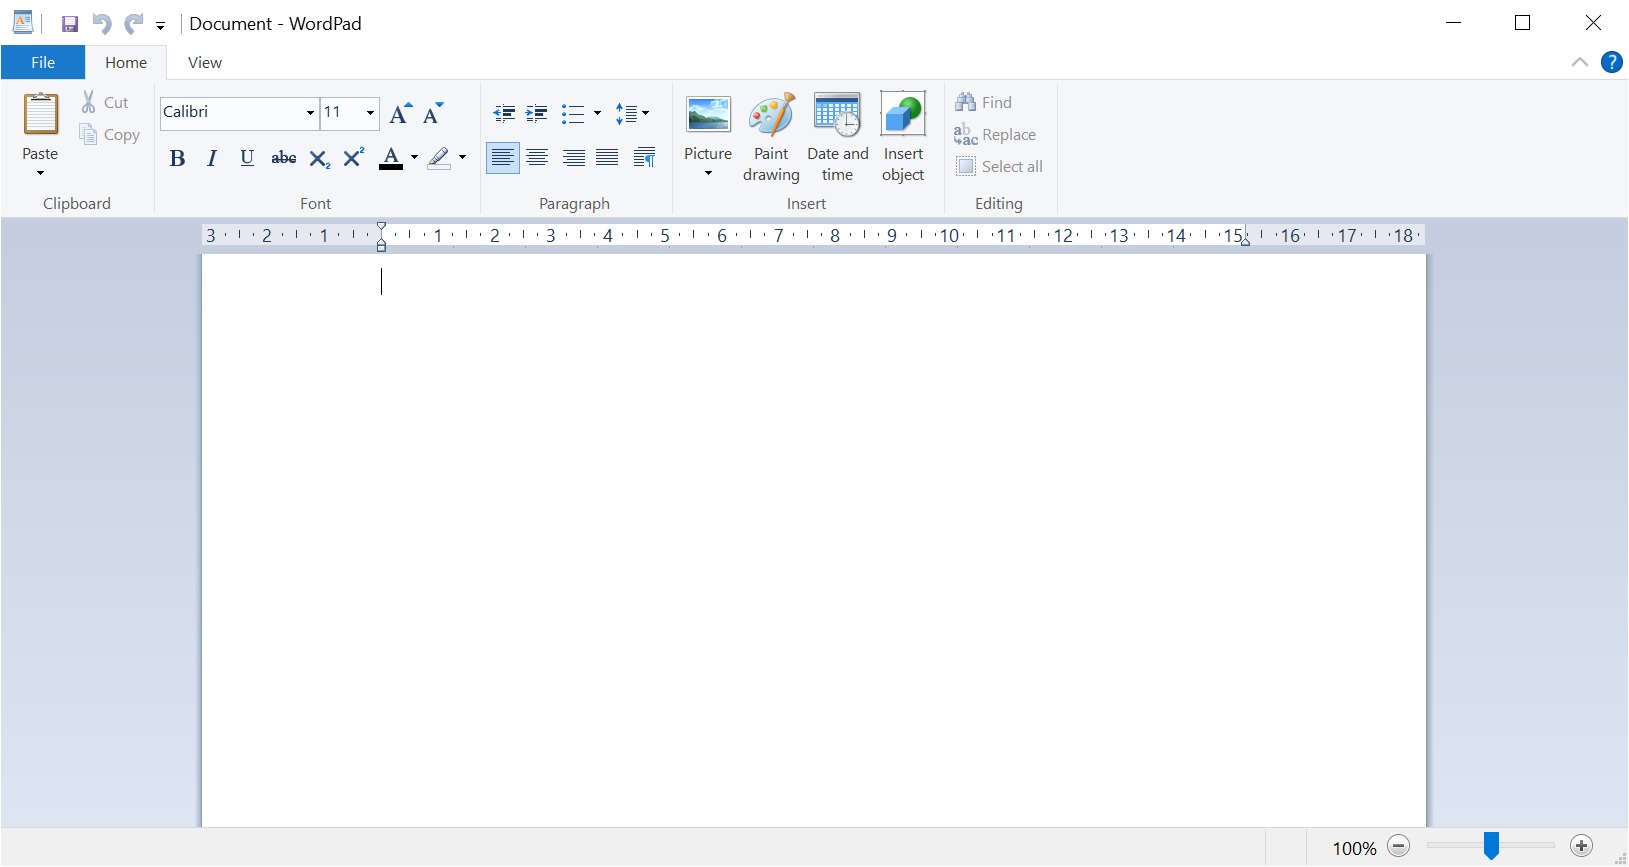 You won’t be able to use WordPad in a future release of Windows 11